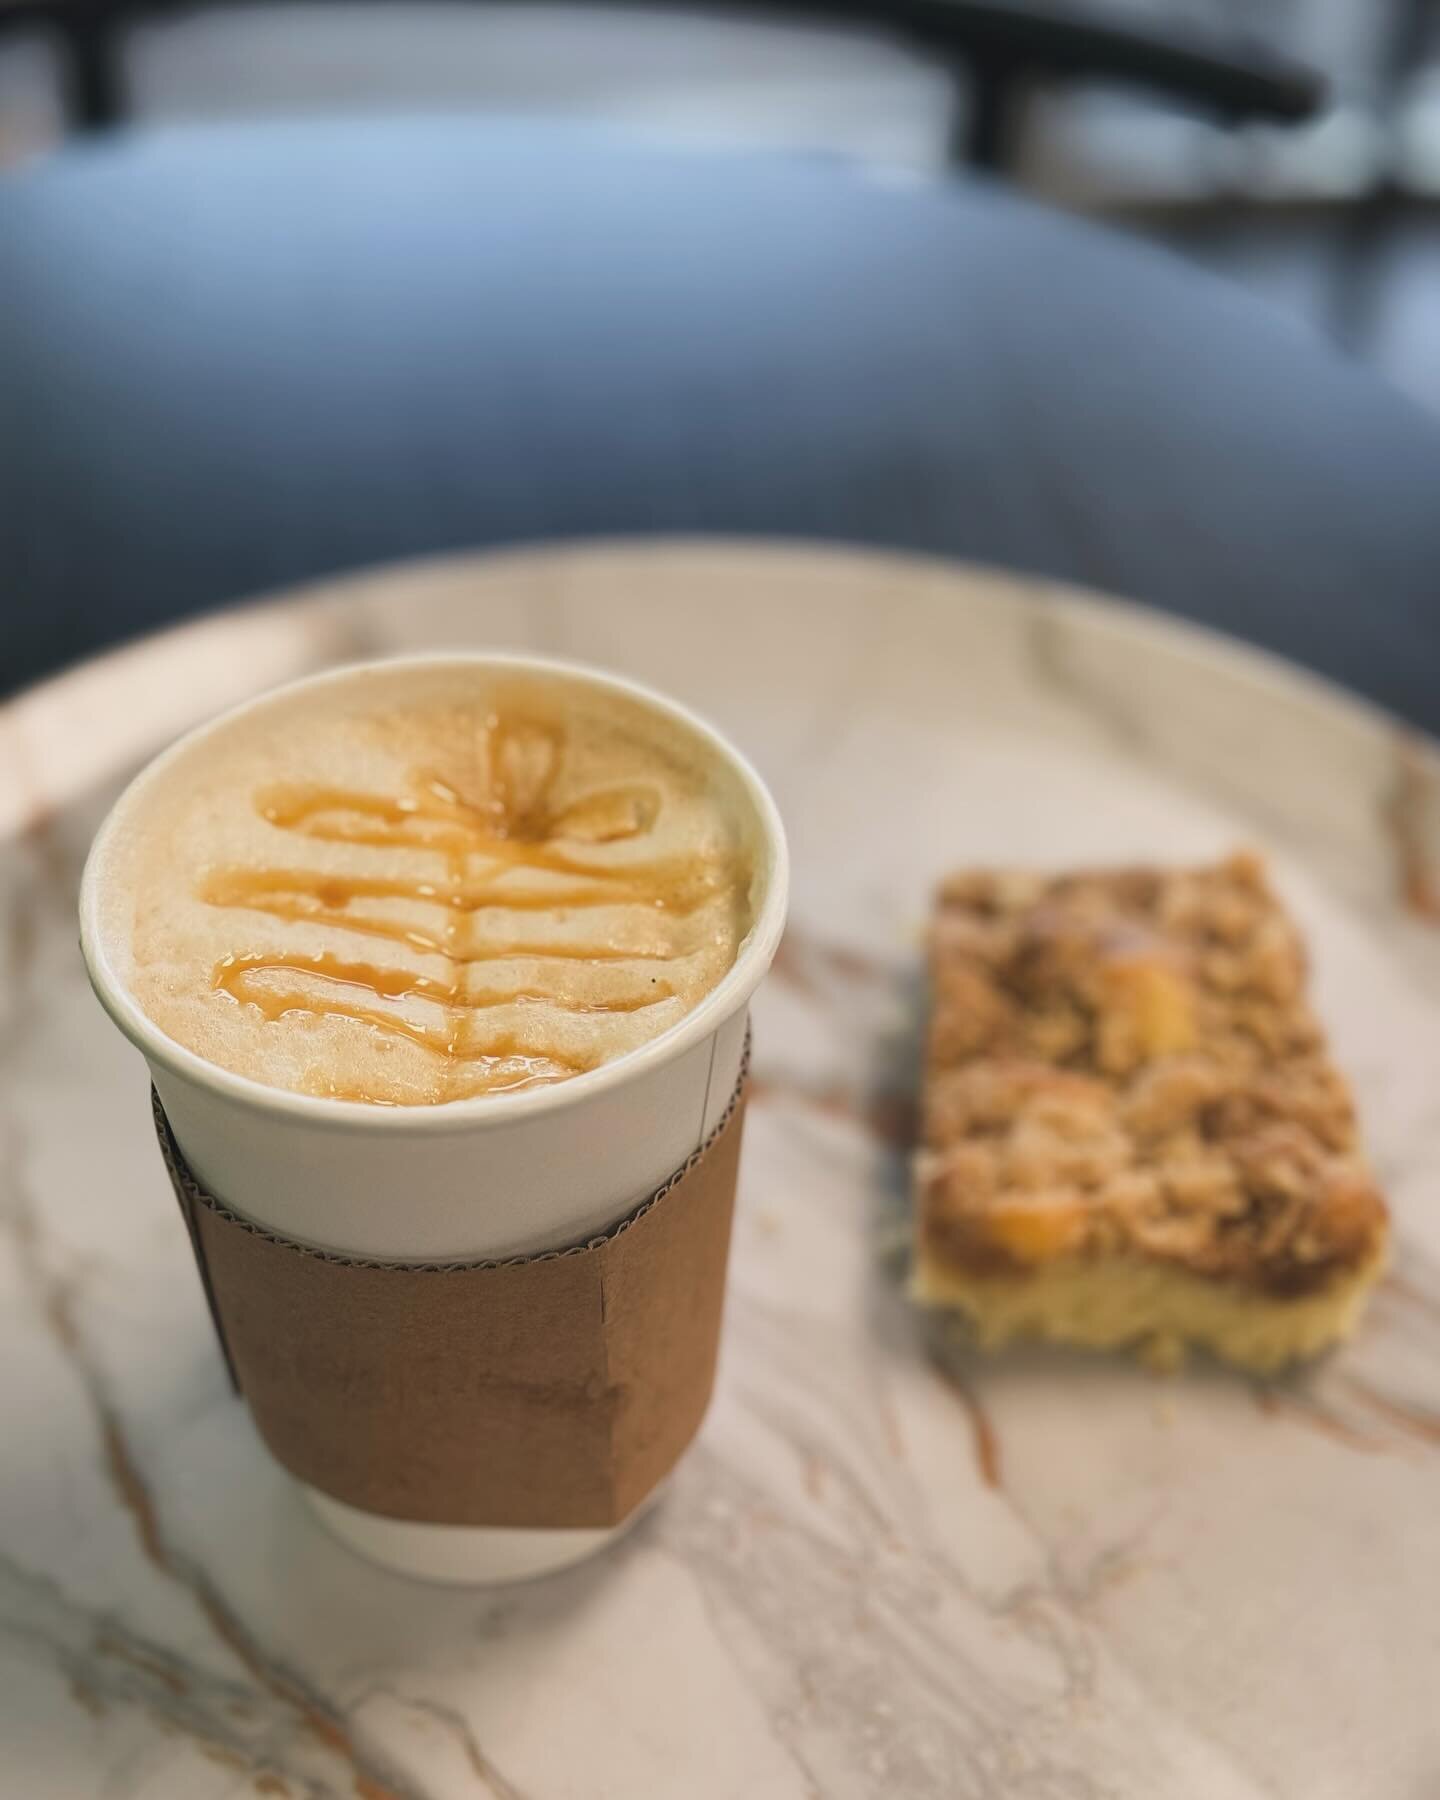 Need a &lsquo;pick-me-up&rsquo; today? 
☕️Try our CARAMEL BLONDIE LATTE with crumb cake and start your day off right! . .
#benandbean #cafe #coffee #latte #crumbcake #caramel #brunswickcountync #oceanislebeachnc #sunsetbeachnc #oib #ncfoodie #ncfoodf